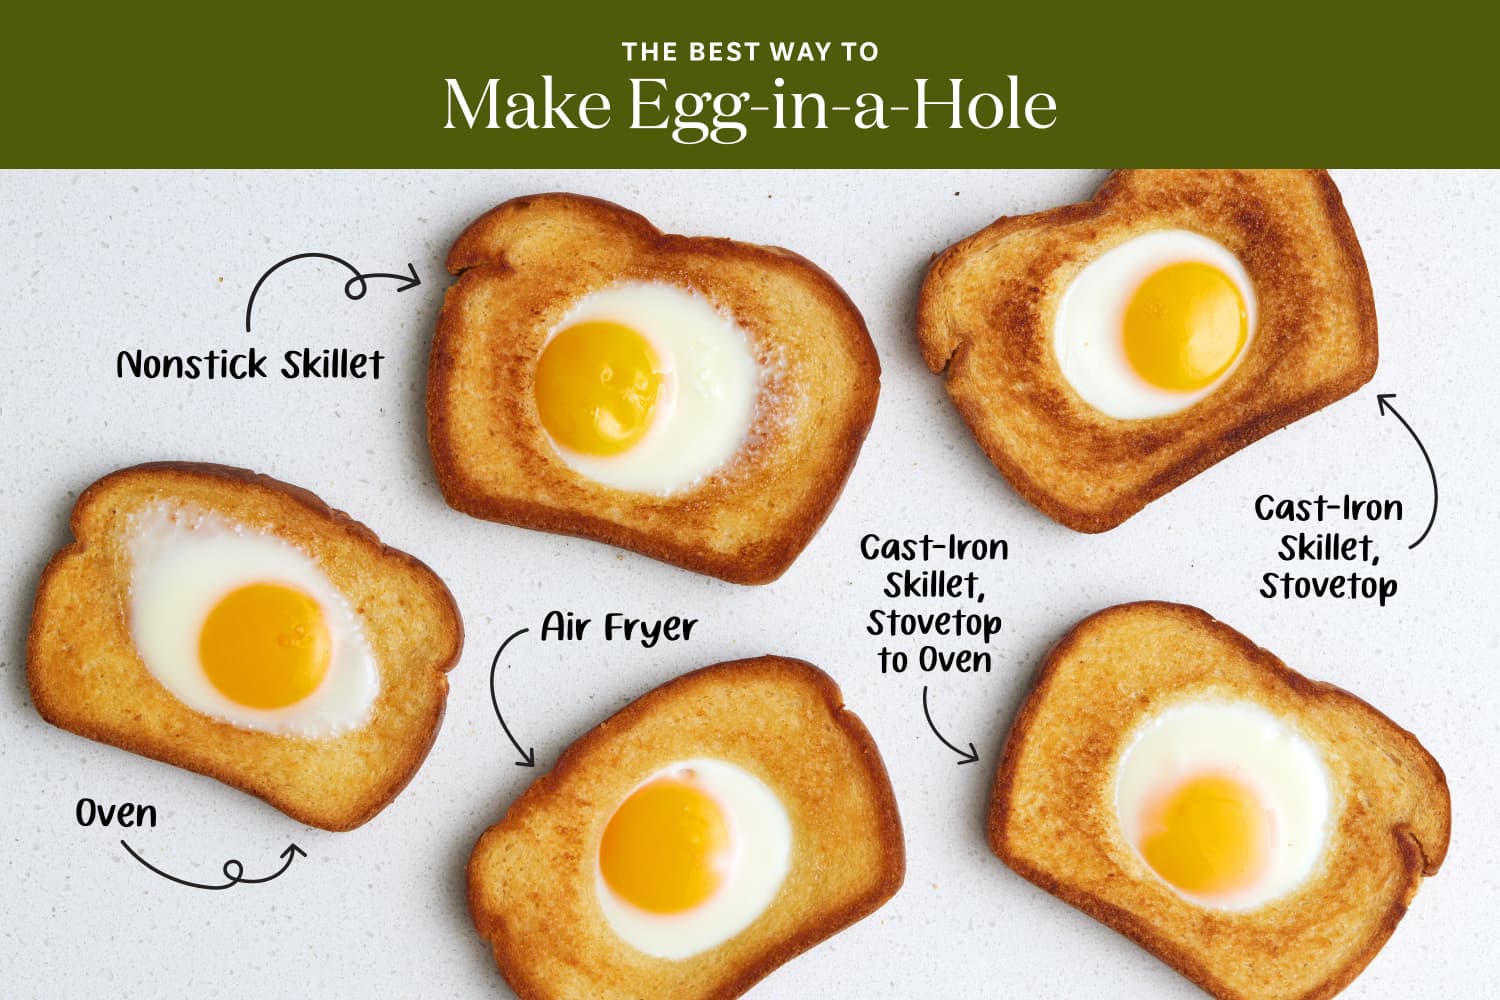 We Tried 5 Ways of Making Egg-in-a-Hole and Found a Clear Winner (That’s Also the Easiest)